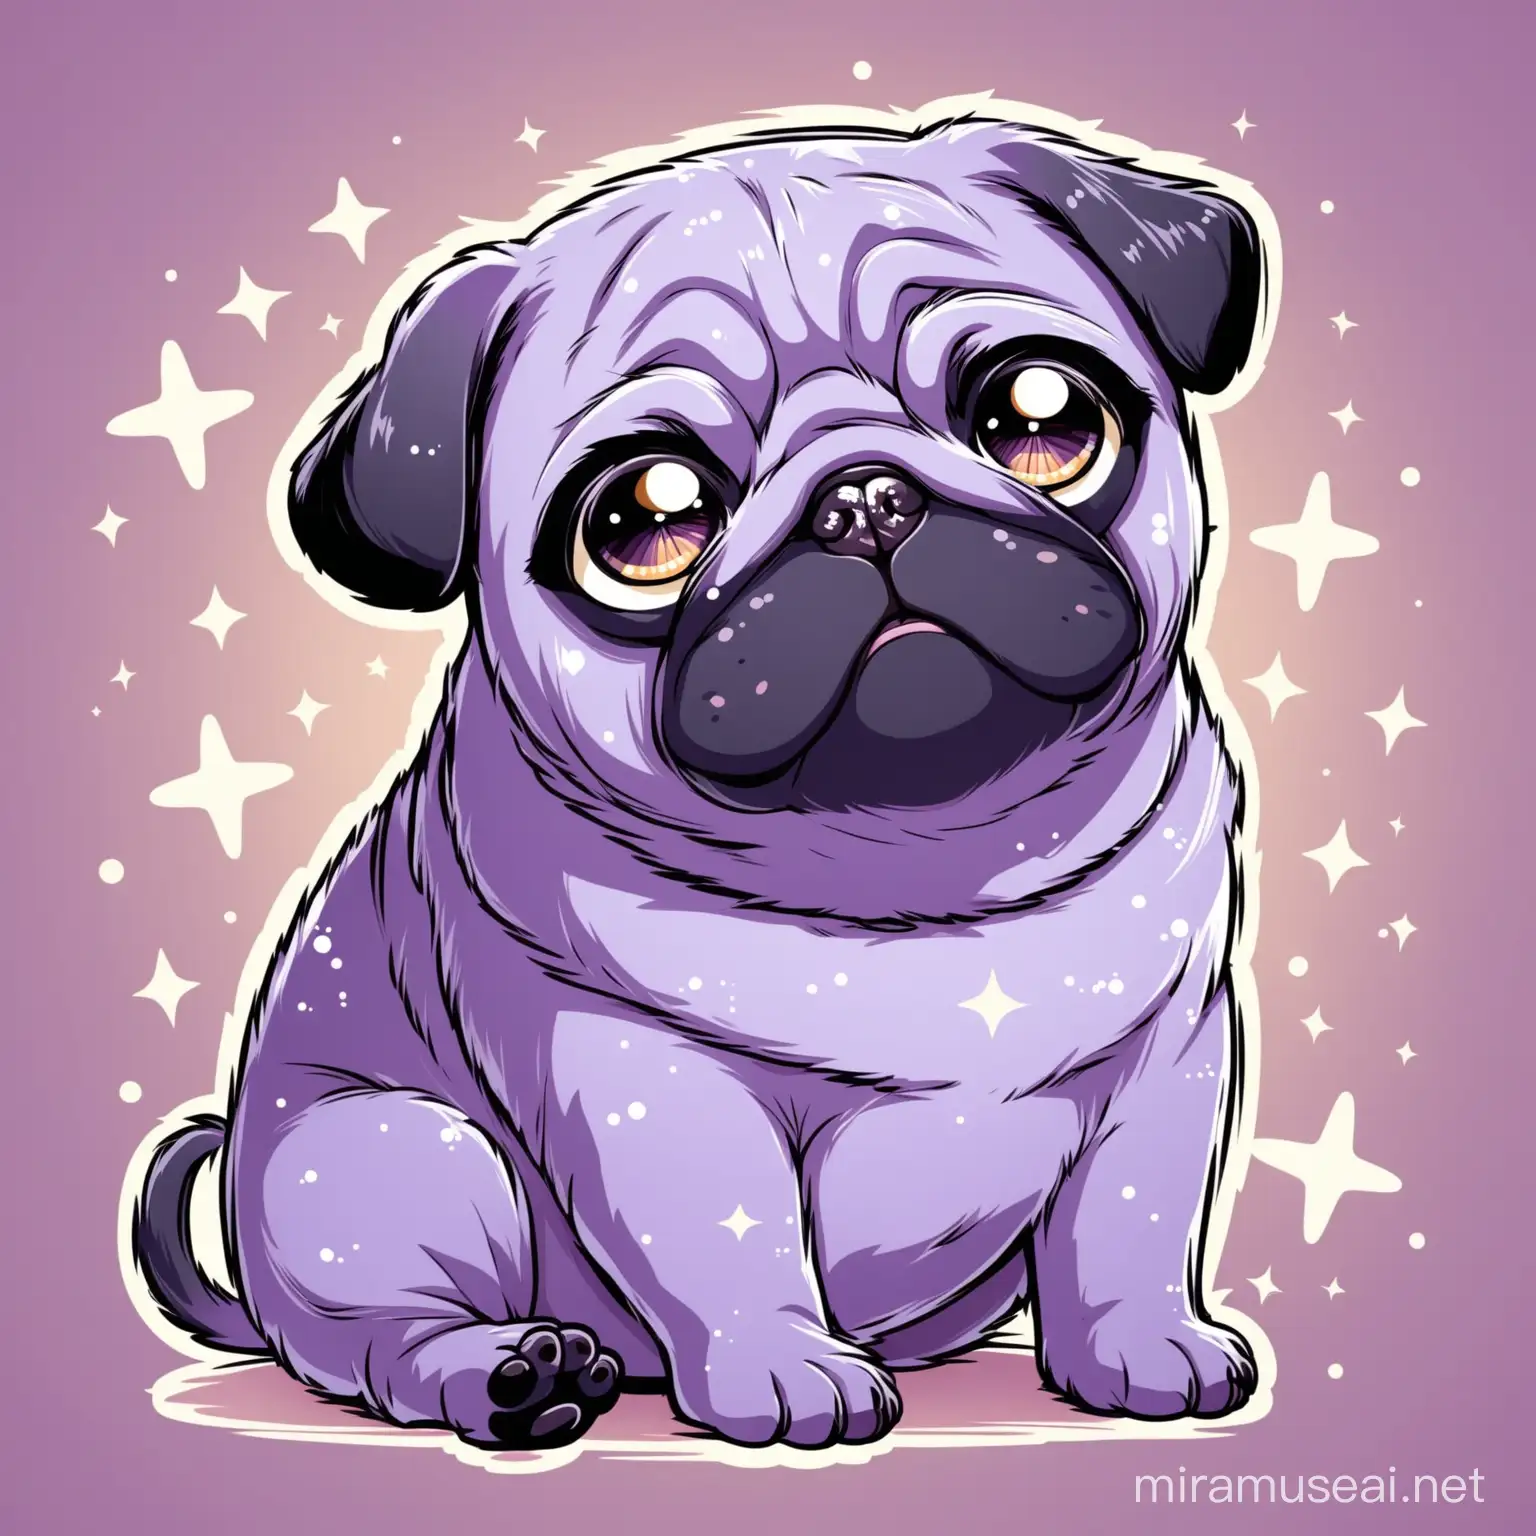 Charming Mischievous Purple Pug with Expressive Eyes